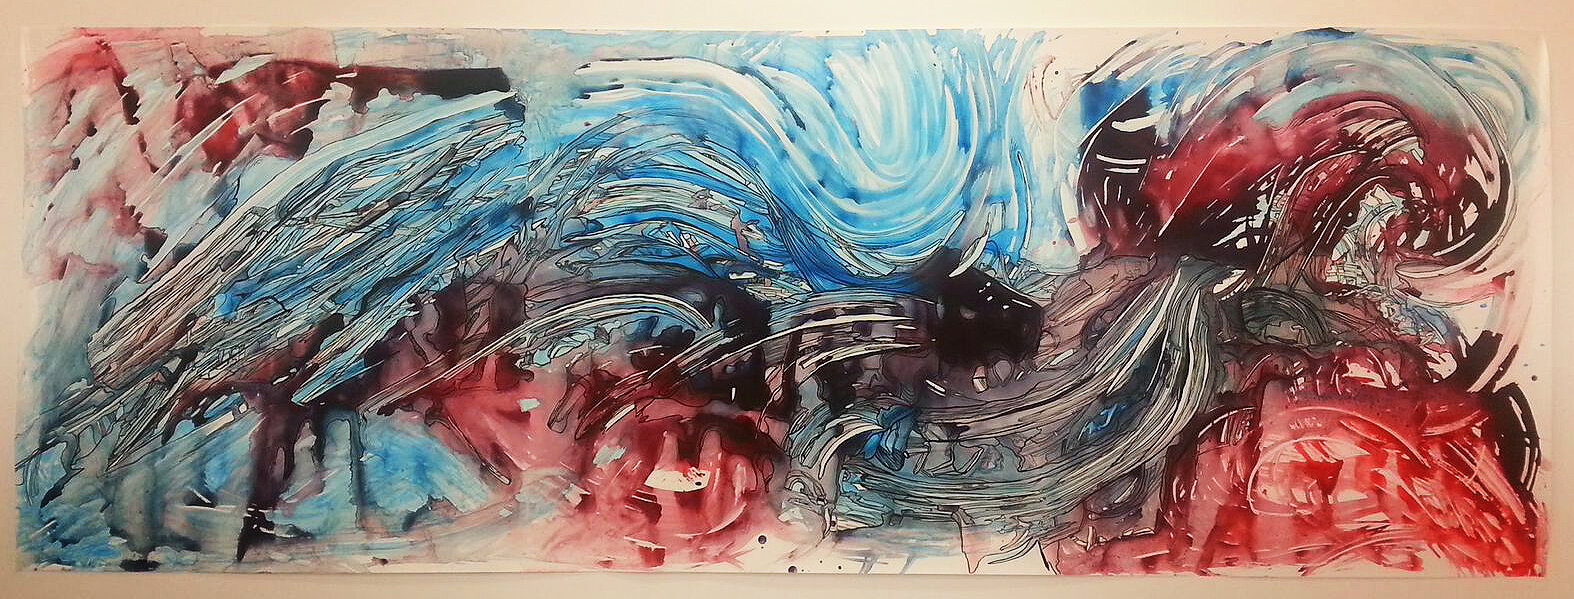  Acrylic and ink on PVC paper, 3m height x 1m long. 